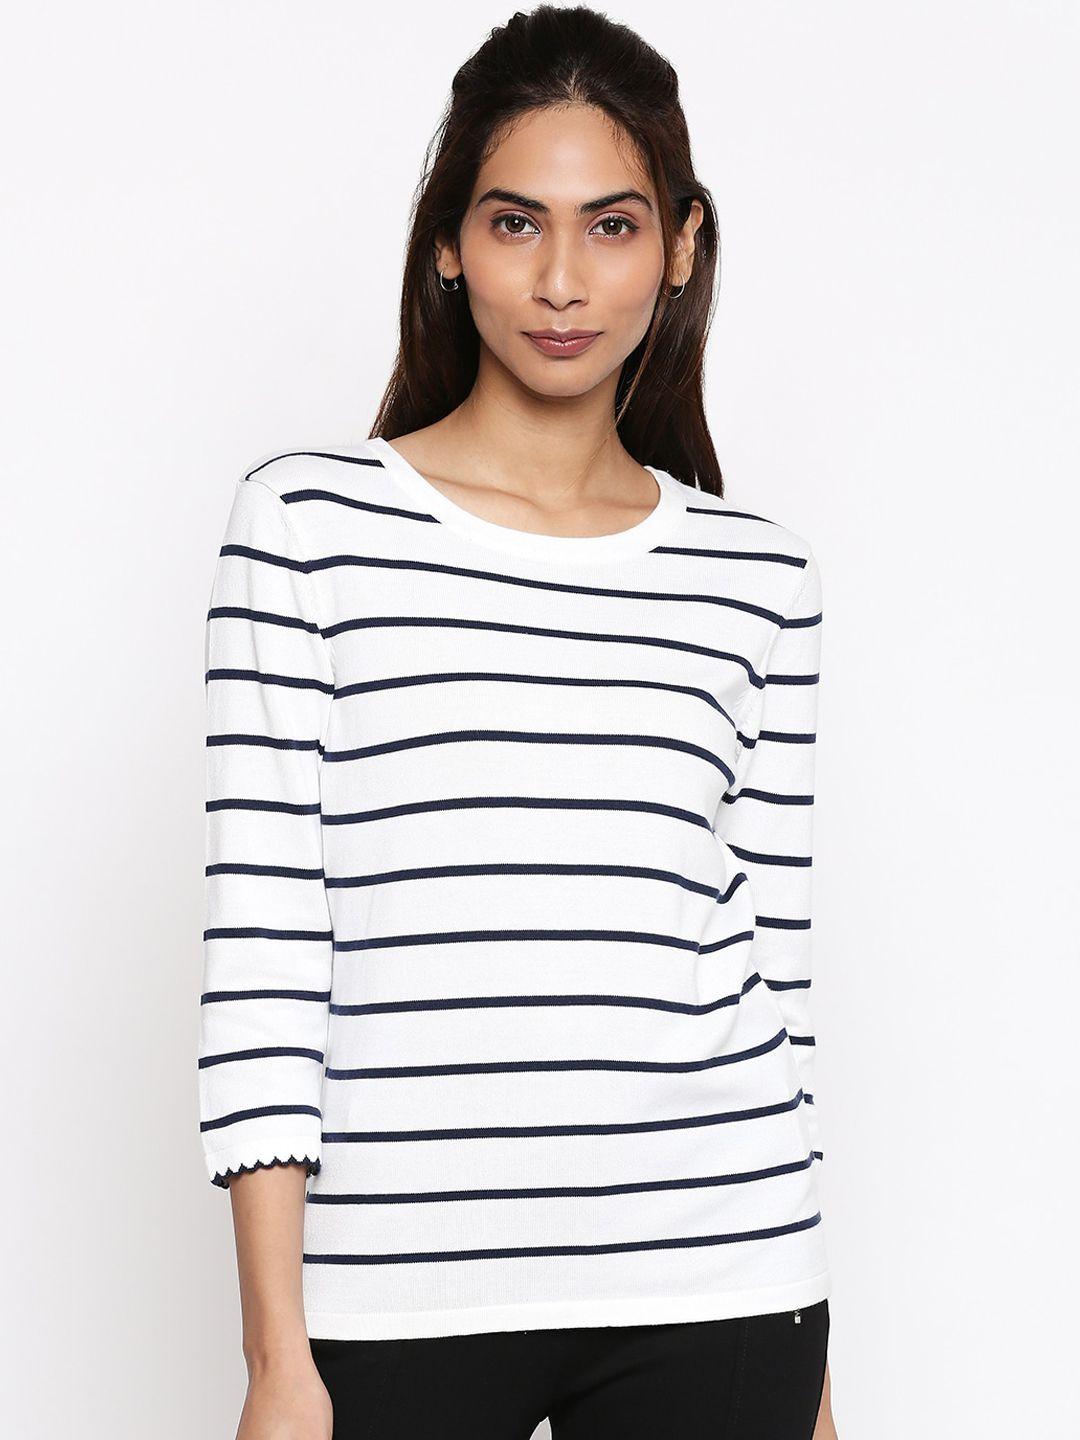 annabelle by pantaloons women white & black striped pullover sweater